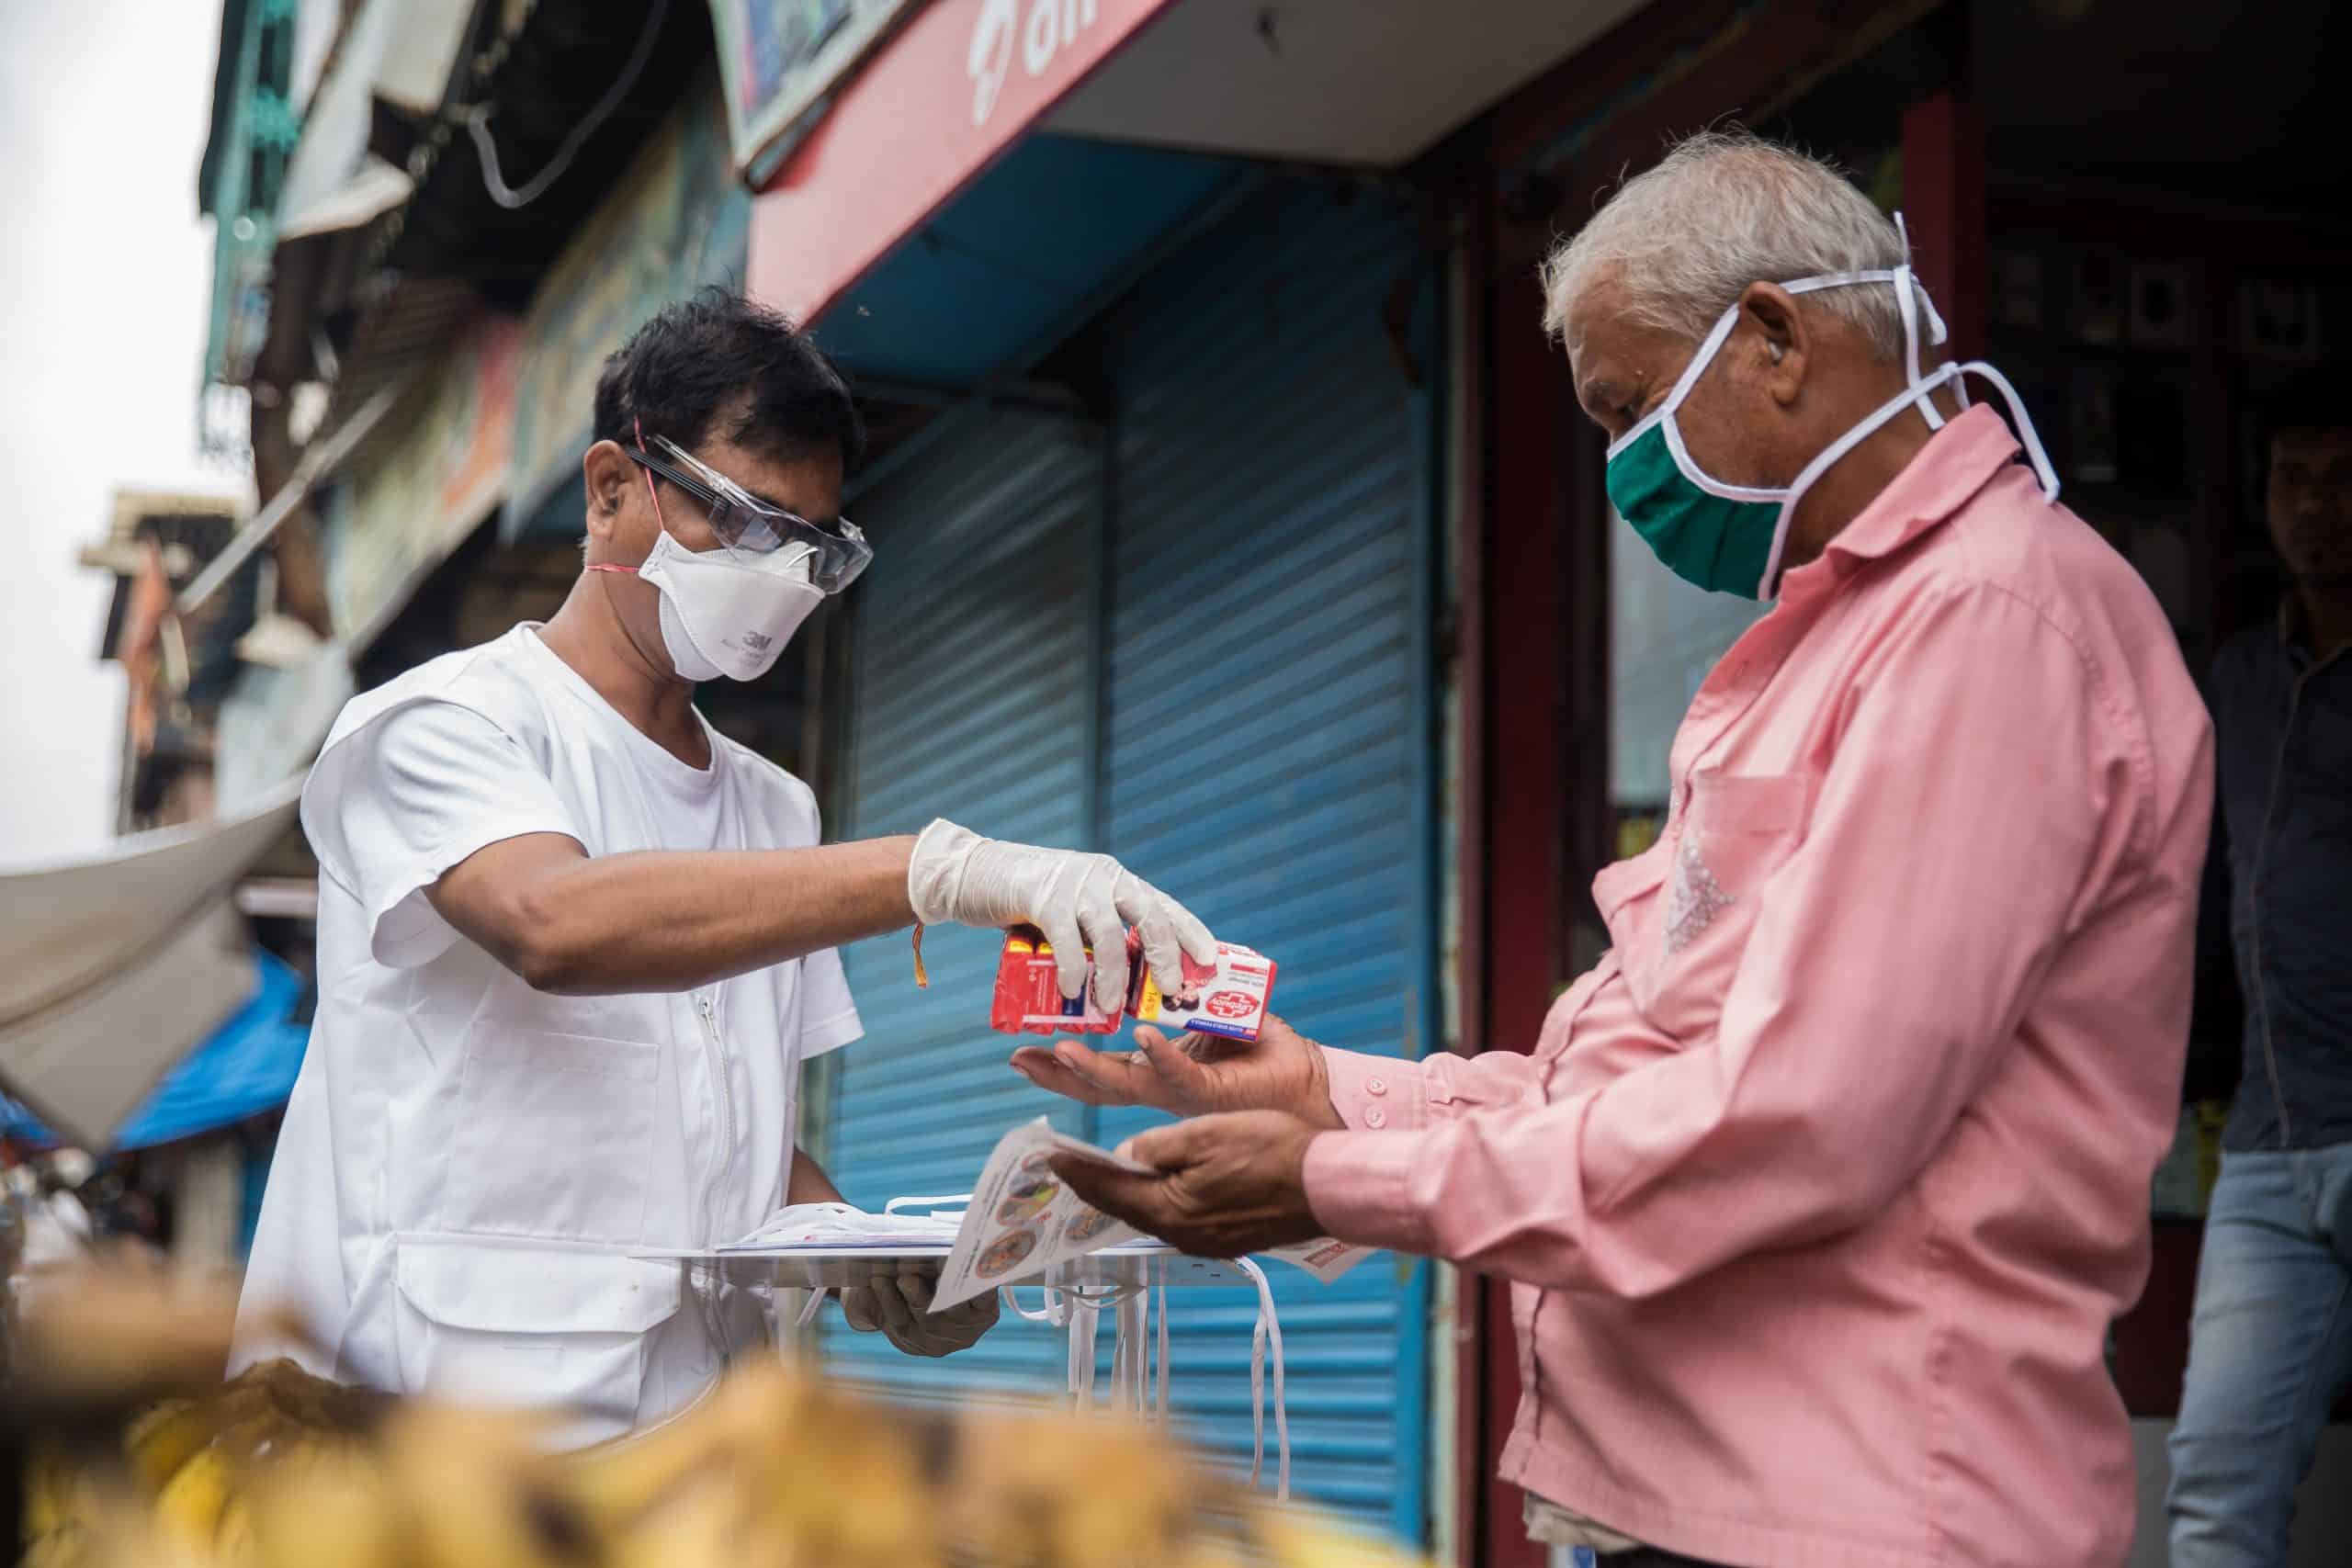 Community Health Educator Ganpat during the Health Promotion activities conducted by MSF in Govandi slums in Mumbai, in order to prevent the spread of COVID-19. © Abhinav Chatterjee/MSF